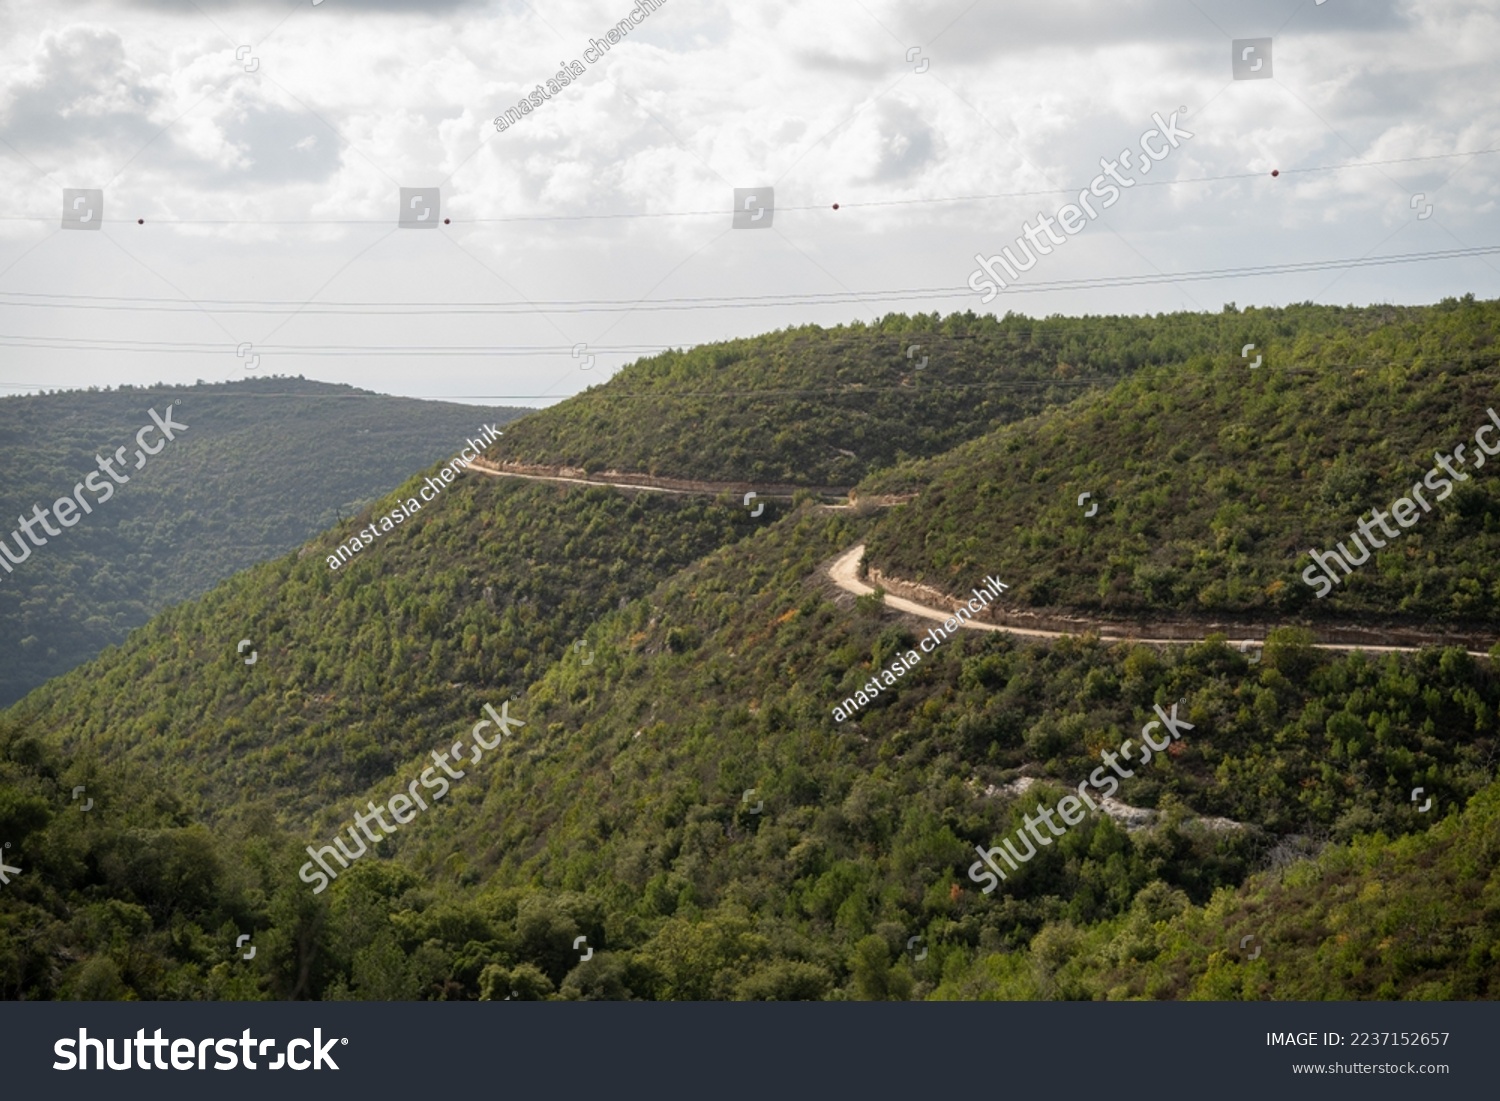 Mount Carmel National Park. view of Carmel forest Israel. A path in the forest. #2237152657